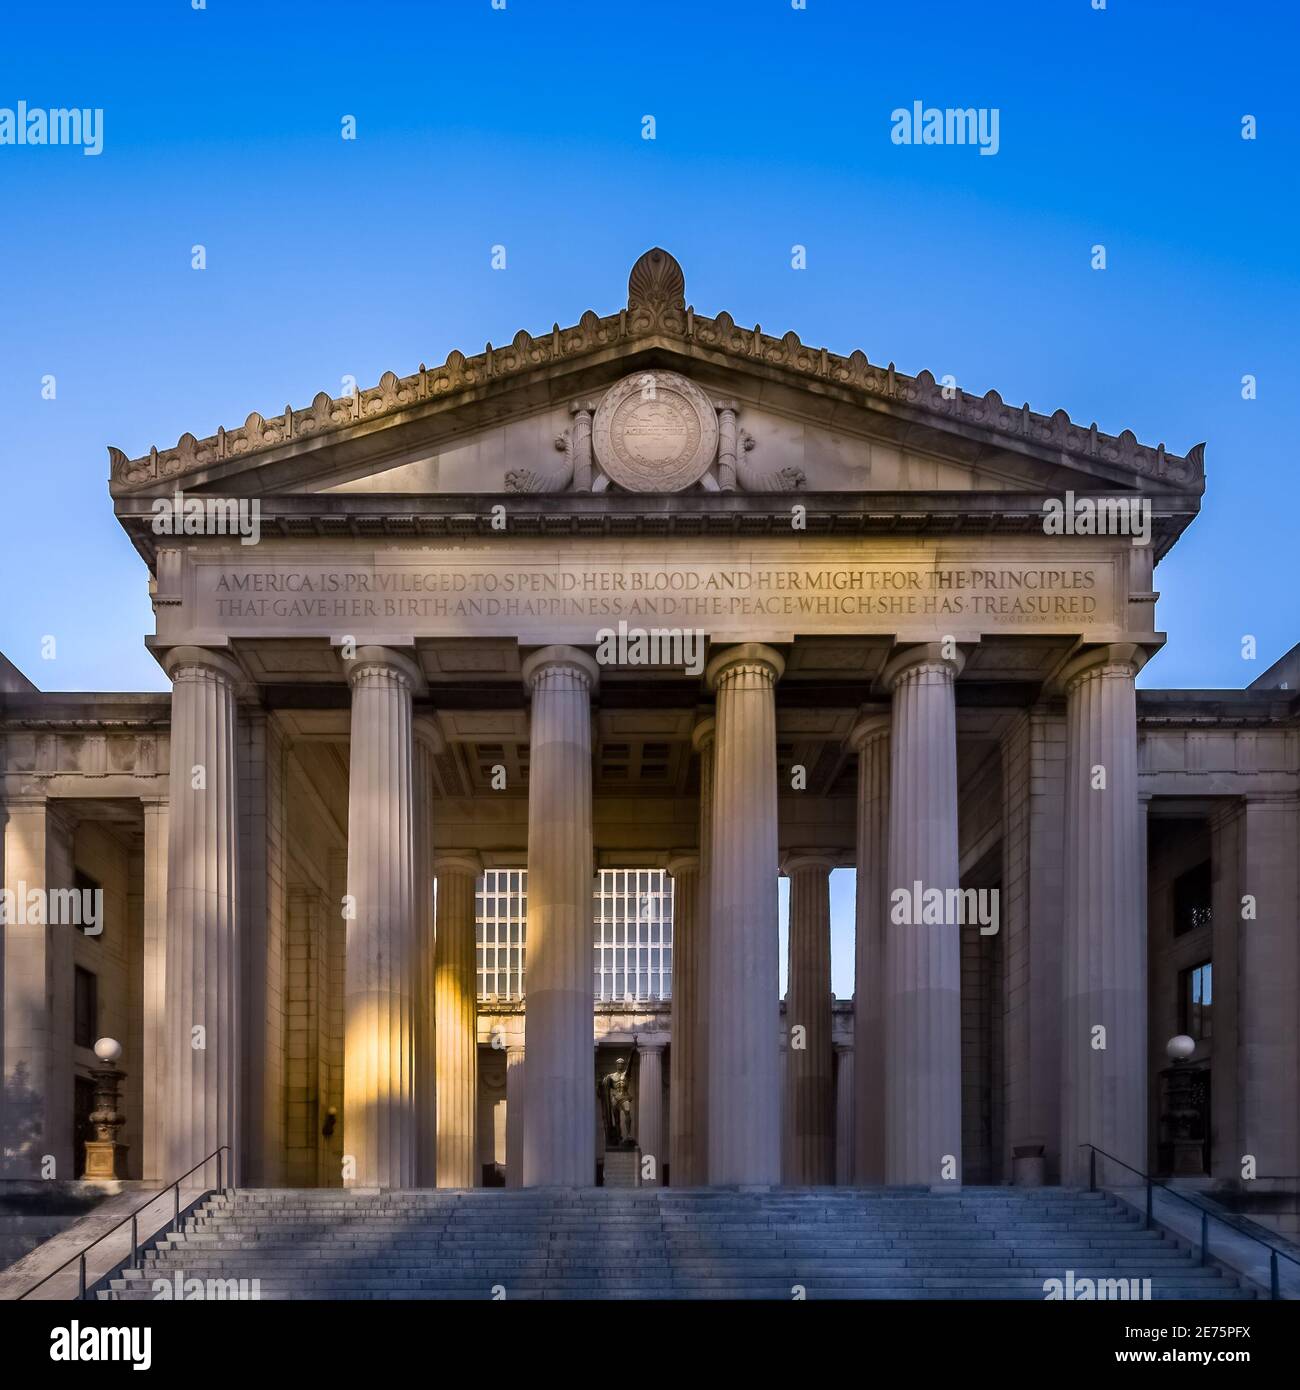 Nashville Government Building with Columns Stock Photo